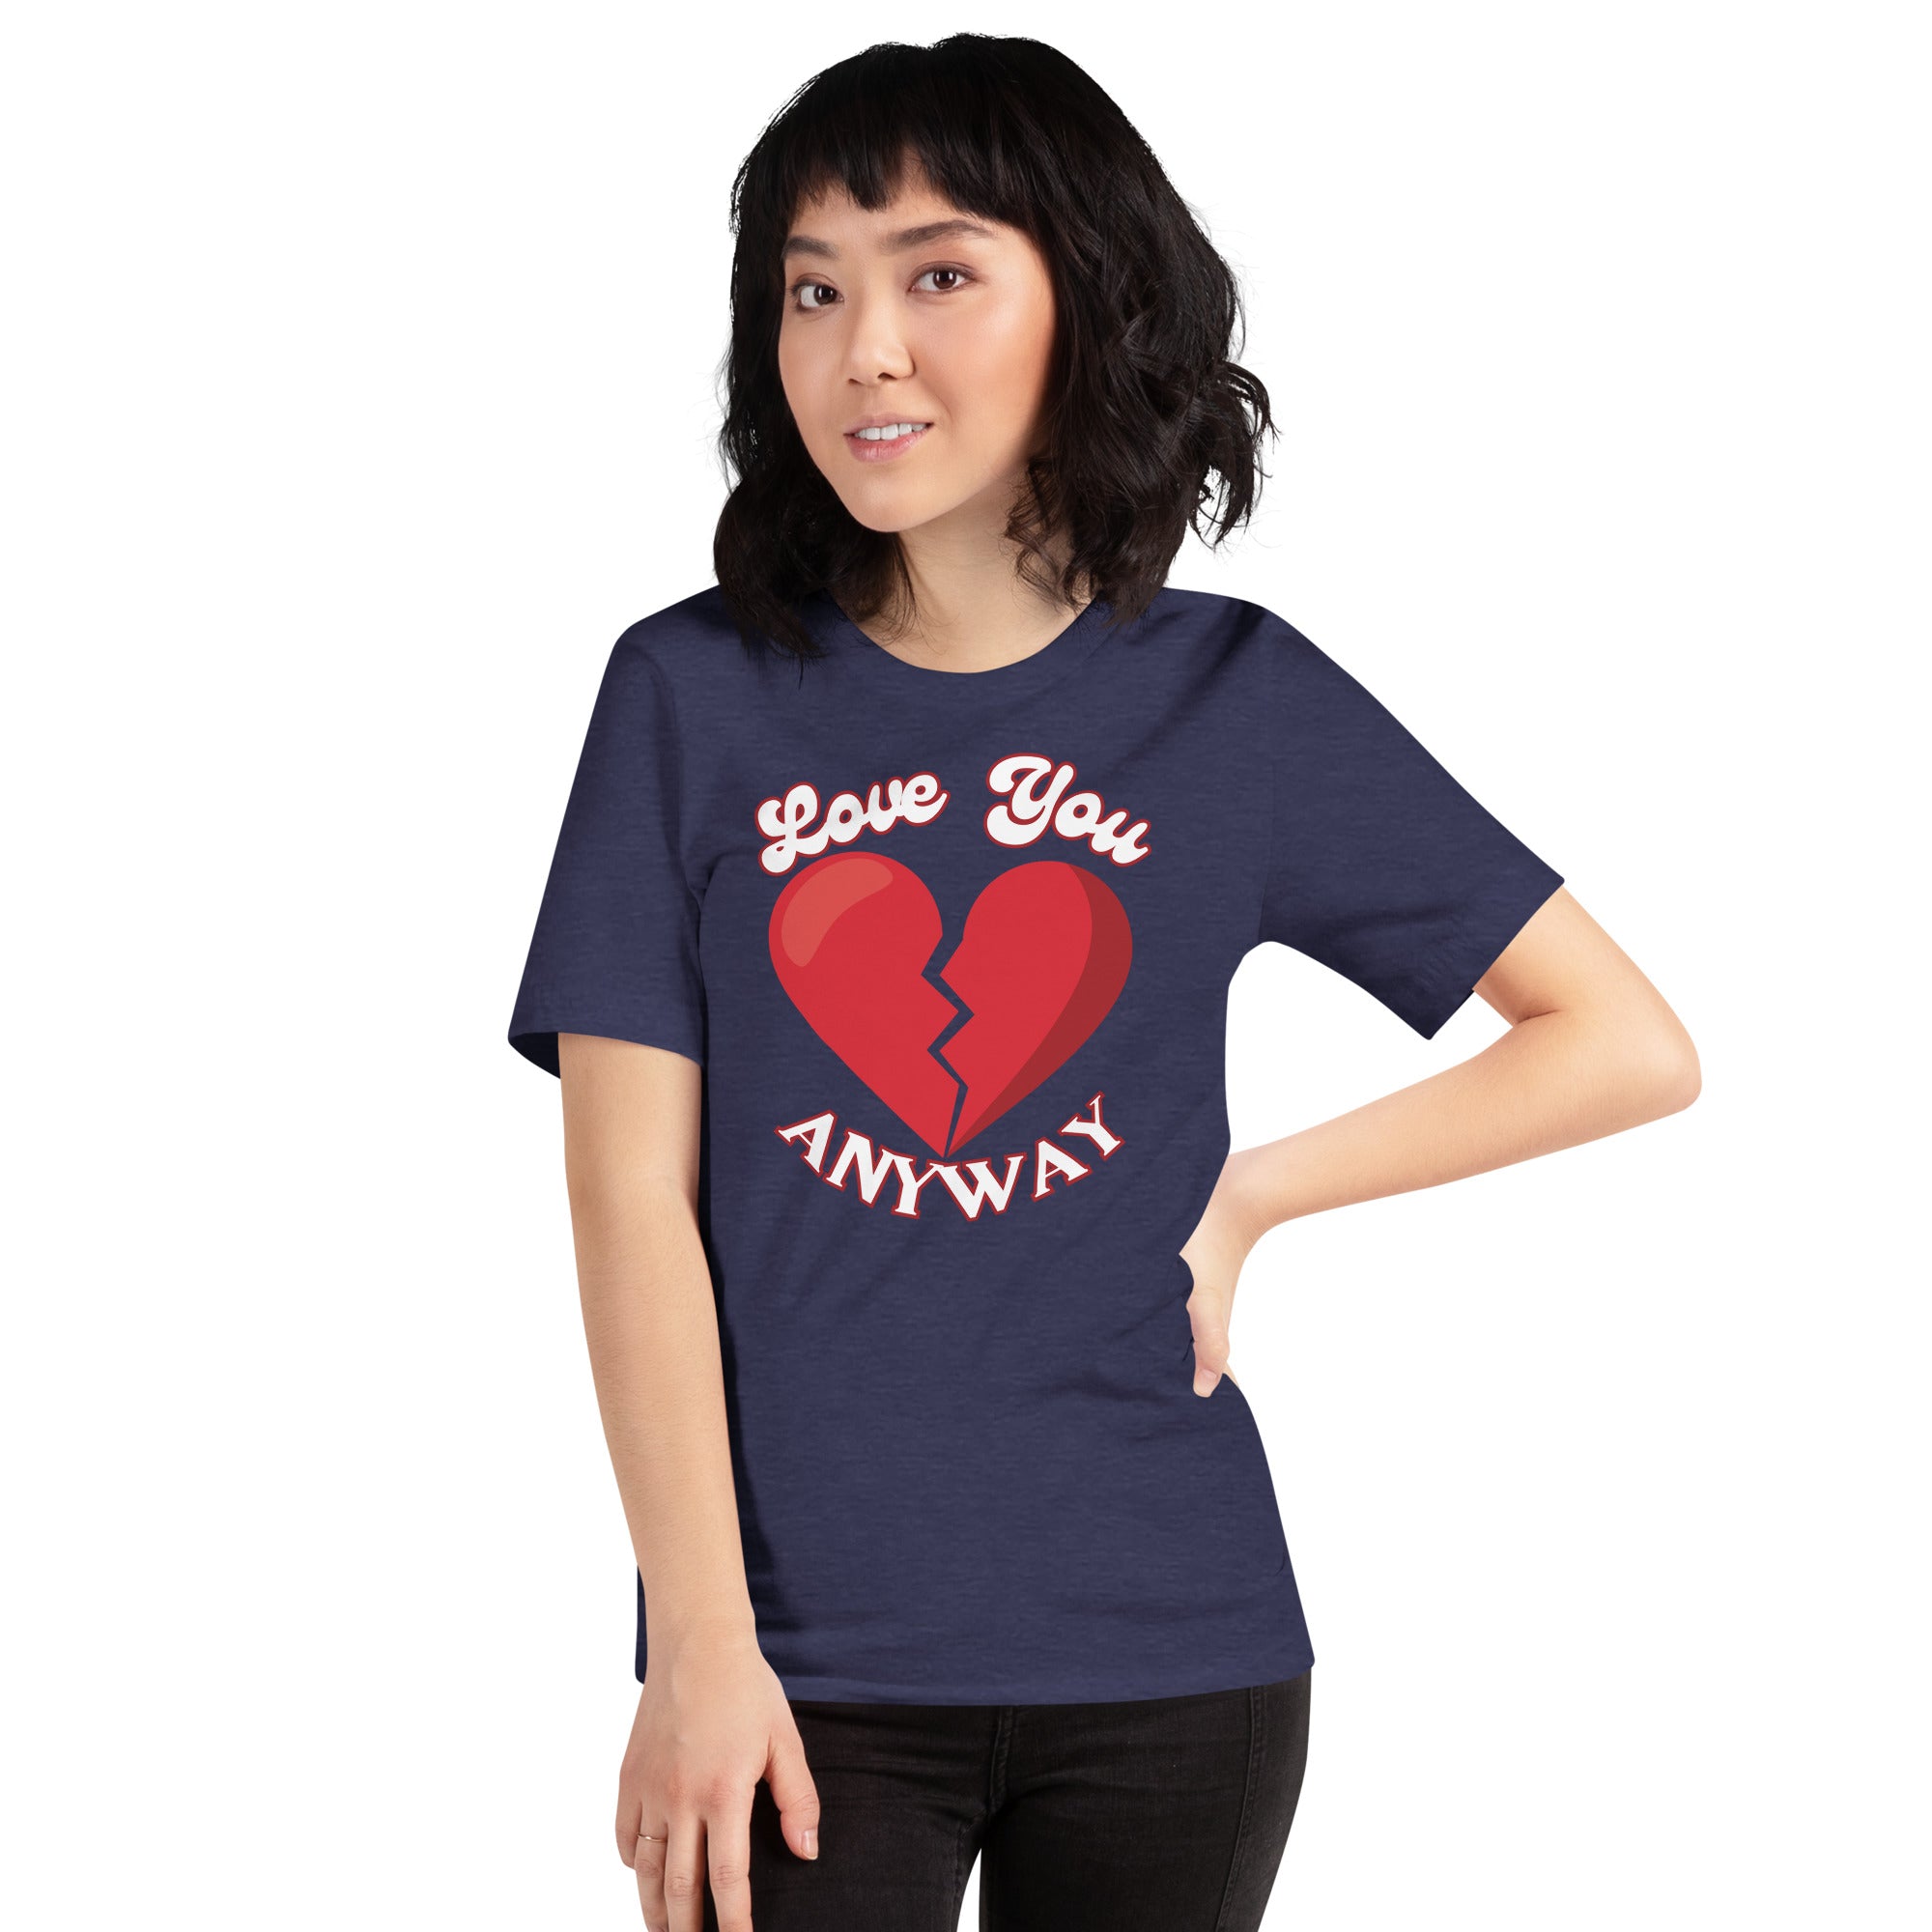 Love You Anyway Country Music T-Shirt on Bella Canva